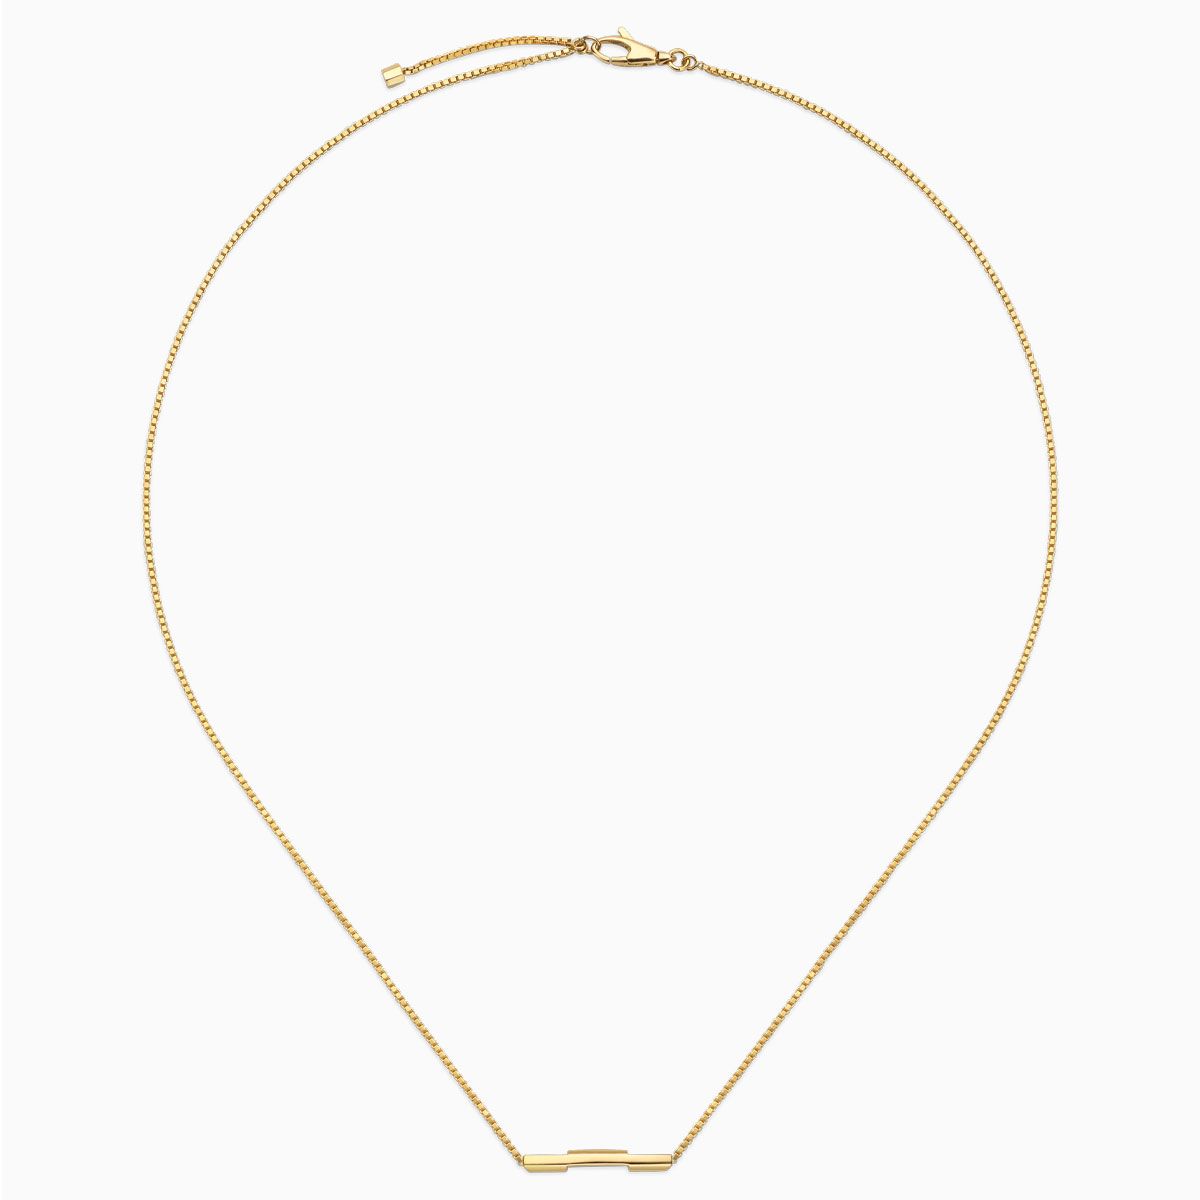 Necklace Gucci yellow gold